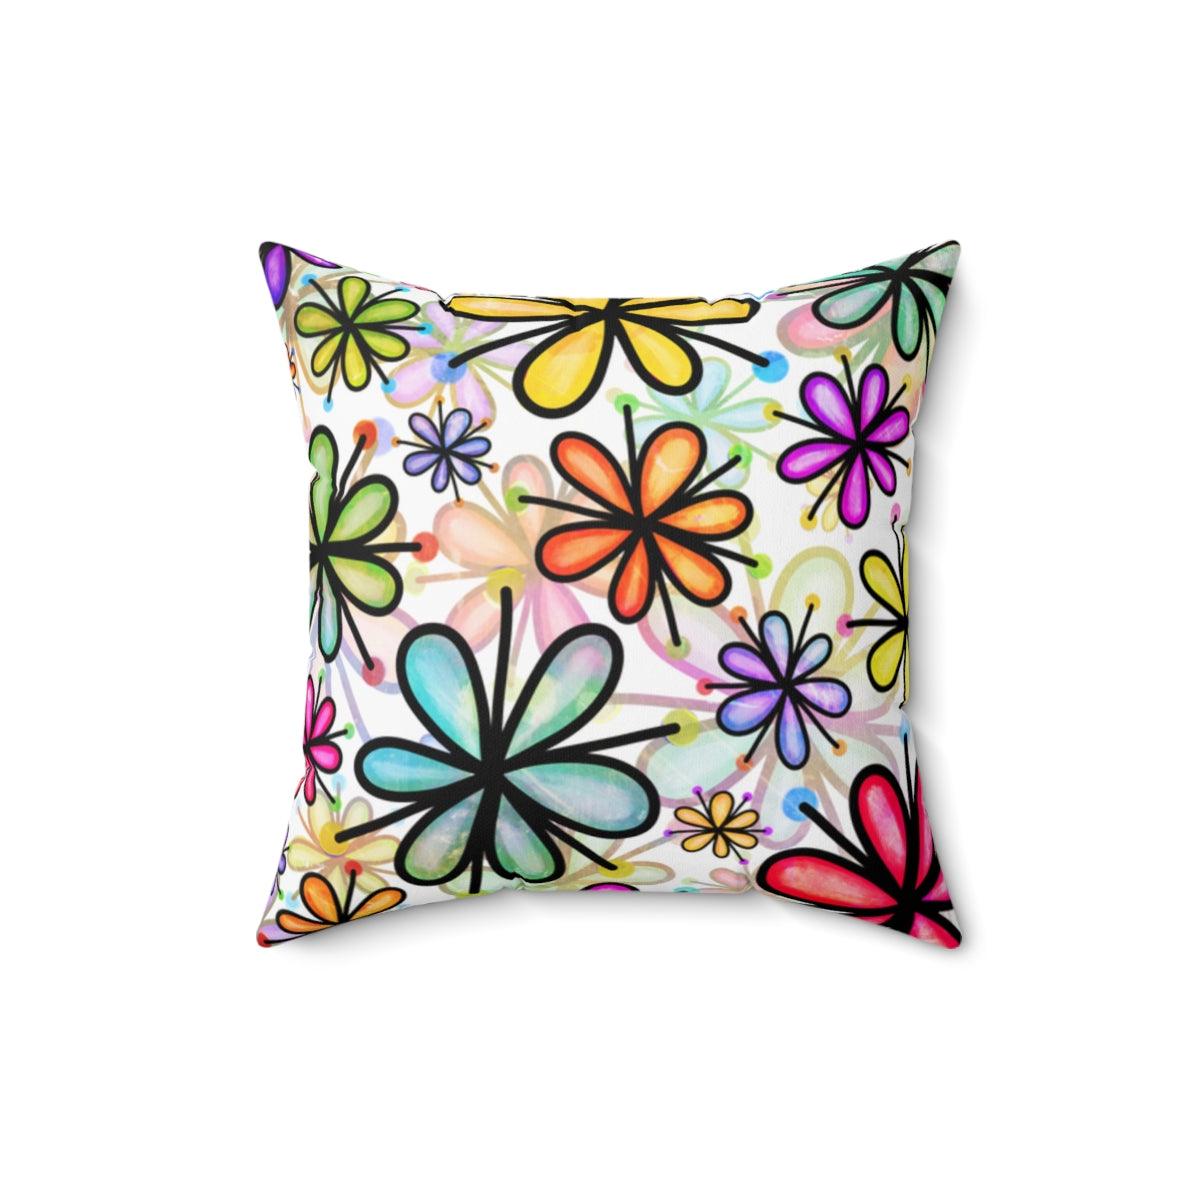 Groovy Flower Doodles Colorful Watercolor Style Pillow | lovevisionkarma.com